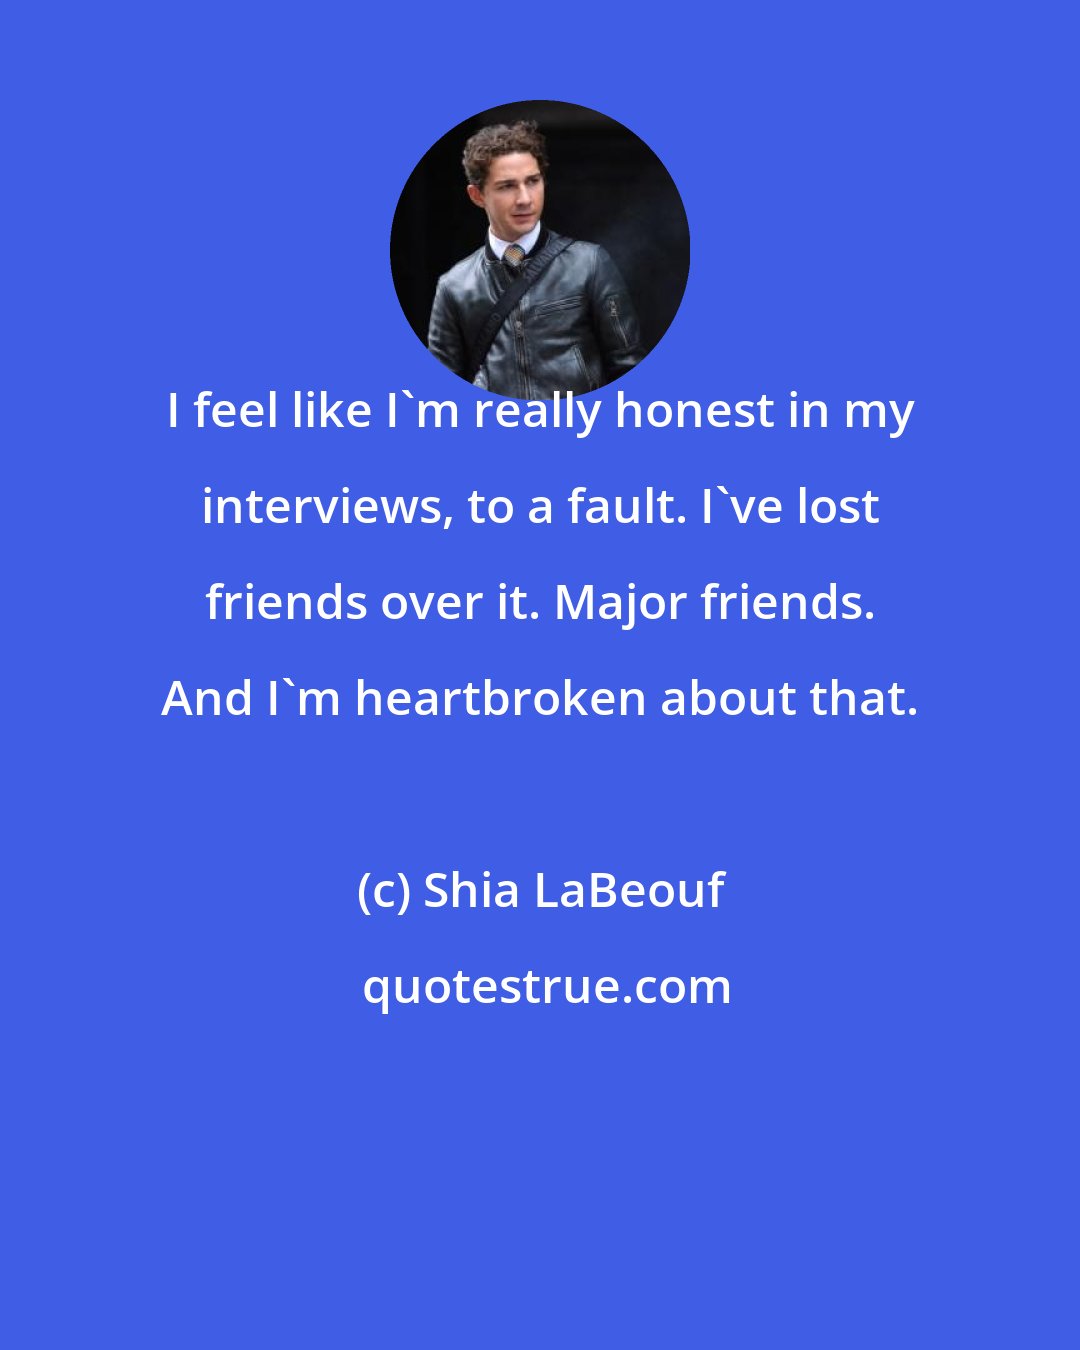 Shia LaBeouf: I feel like I'm really honest in my interviews, to a fault. I've lost friends over it. Major friends. And I'm heartbroken about that.